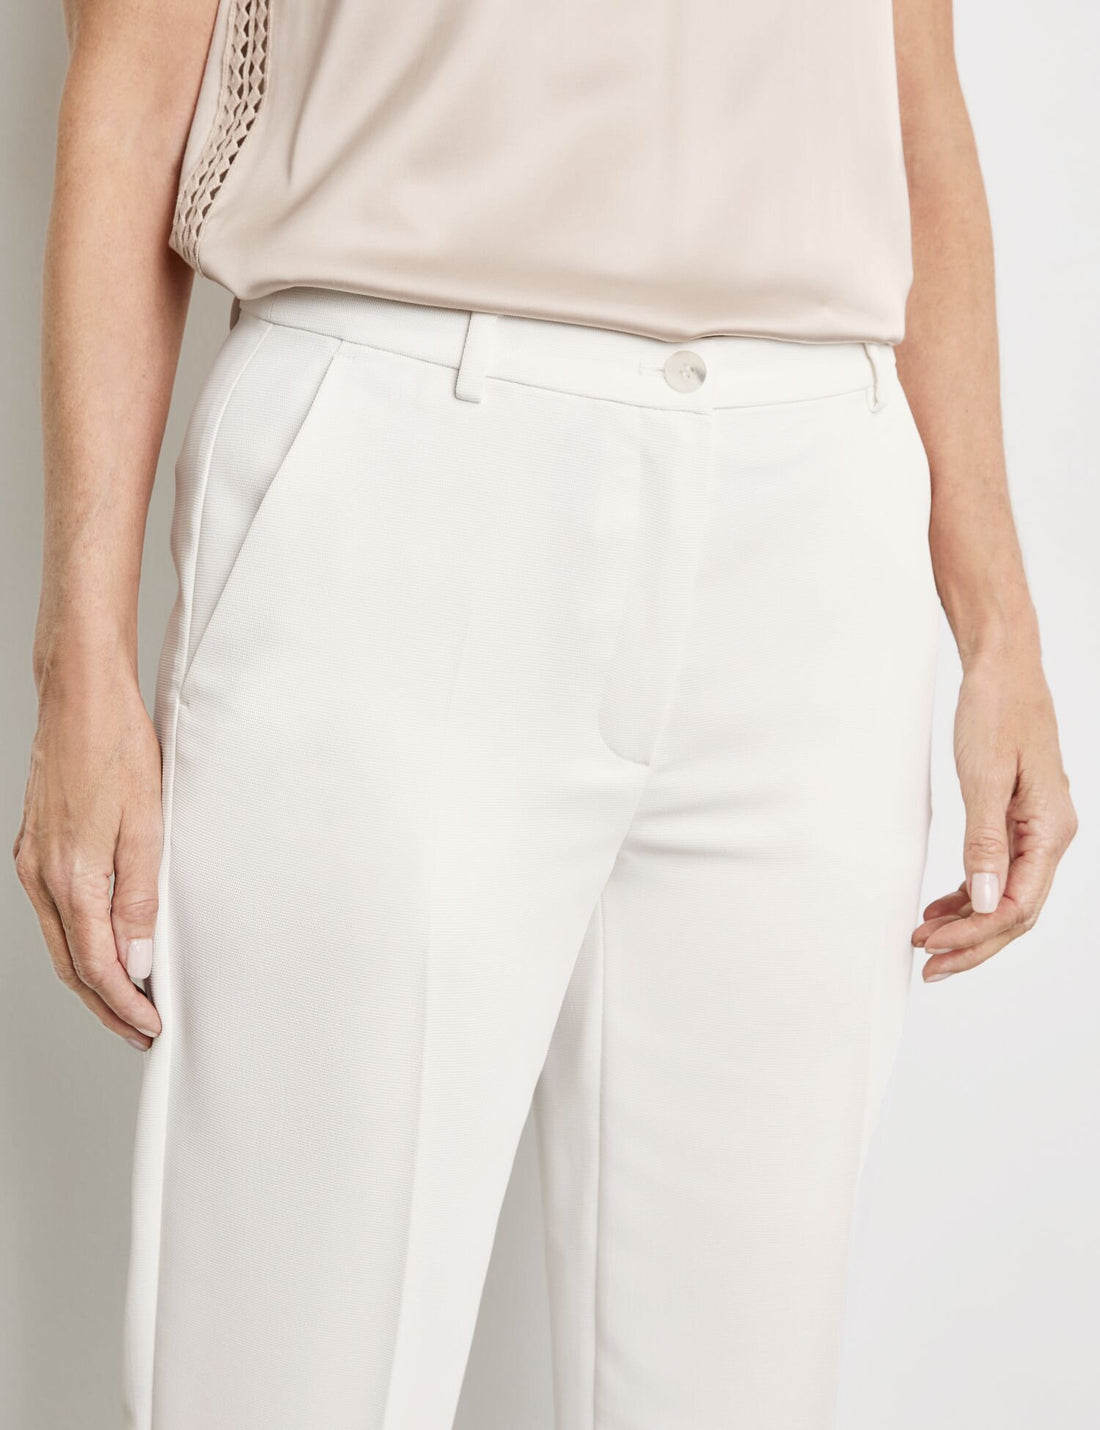 Elegant Trousers With Pressed Pleats_320026-31278_99700_02